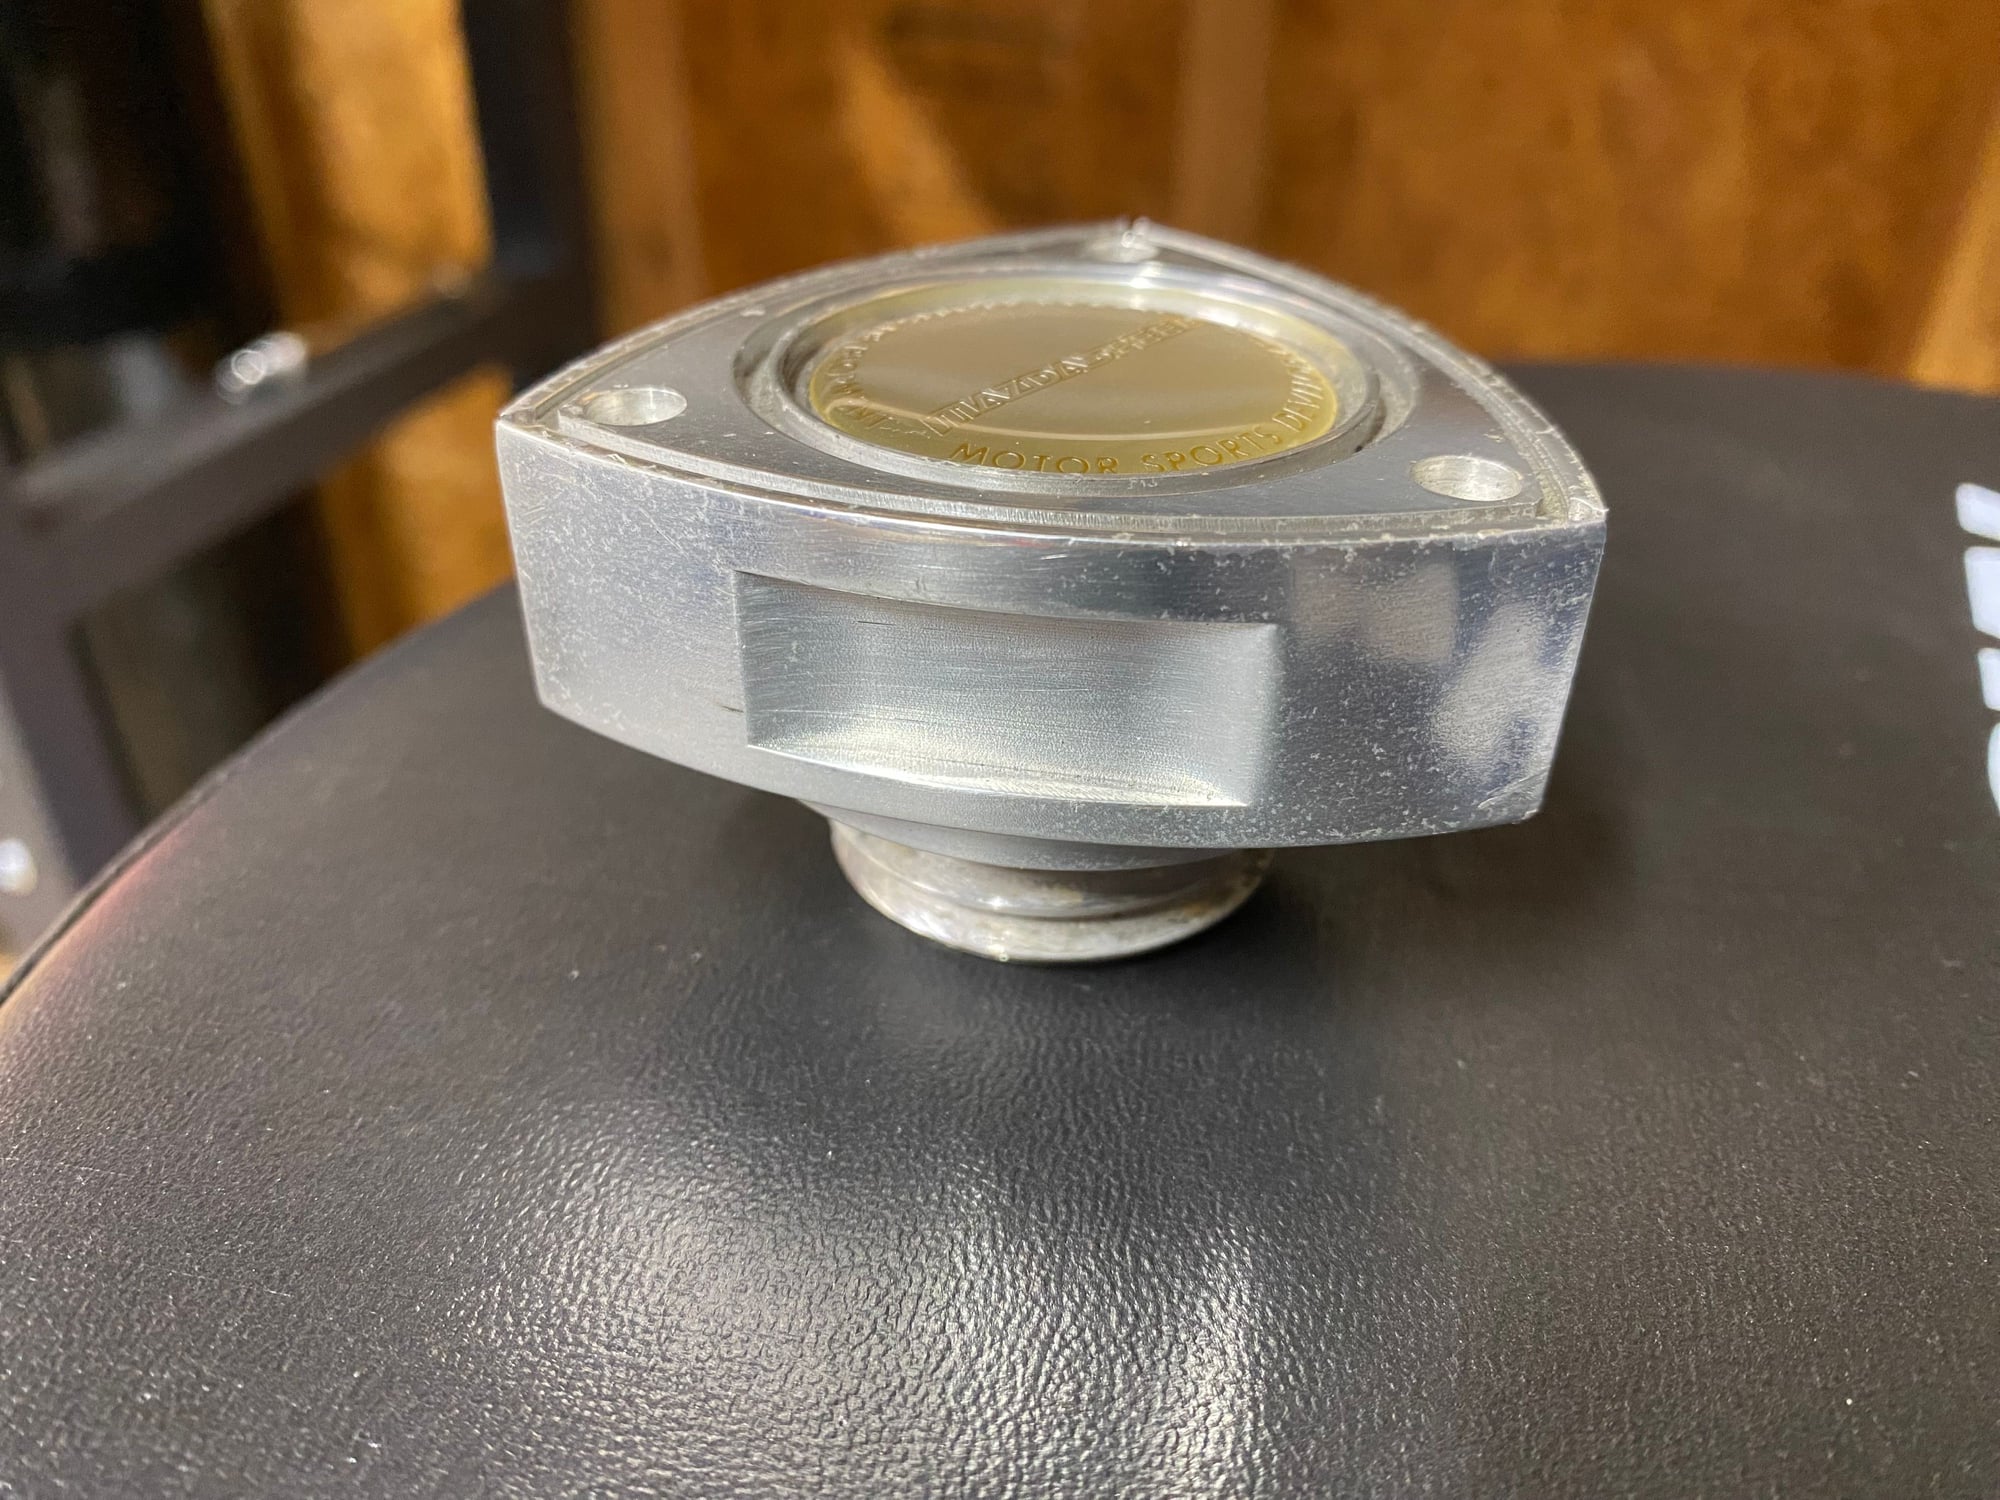 Miscellaneous - Genuine MazdaSpeed Oil Filler Cap Rotary! (RARE) - Used - 1986 to 1995 Mazda RX-7 - Prince Frederick, MD 20678, United States